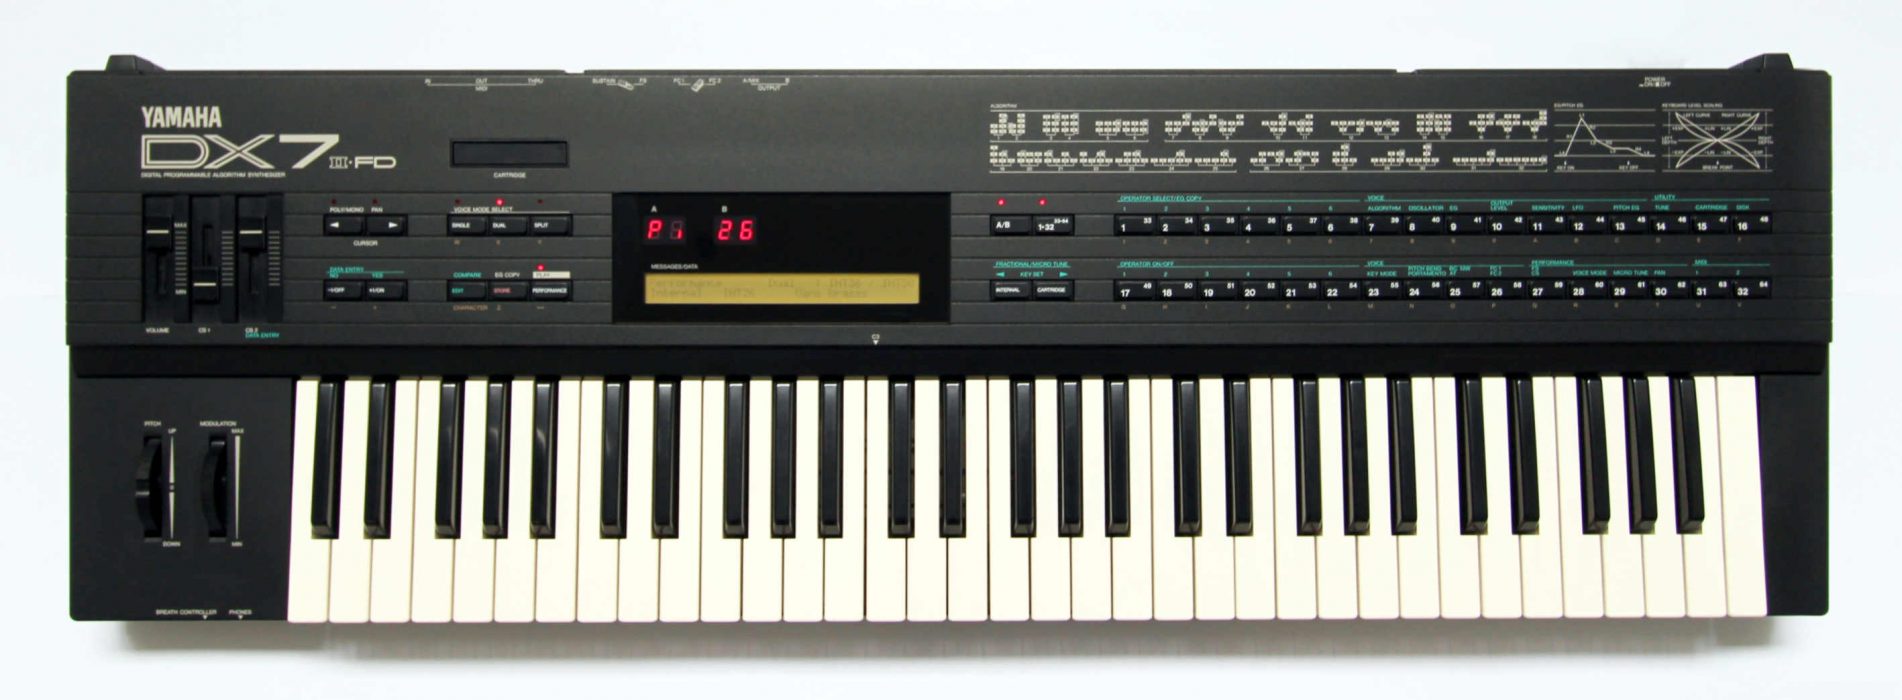 Yamaha DX7IIFD Synthesizer (1986) | Wolf Review